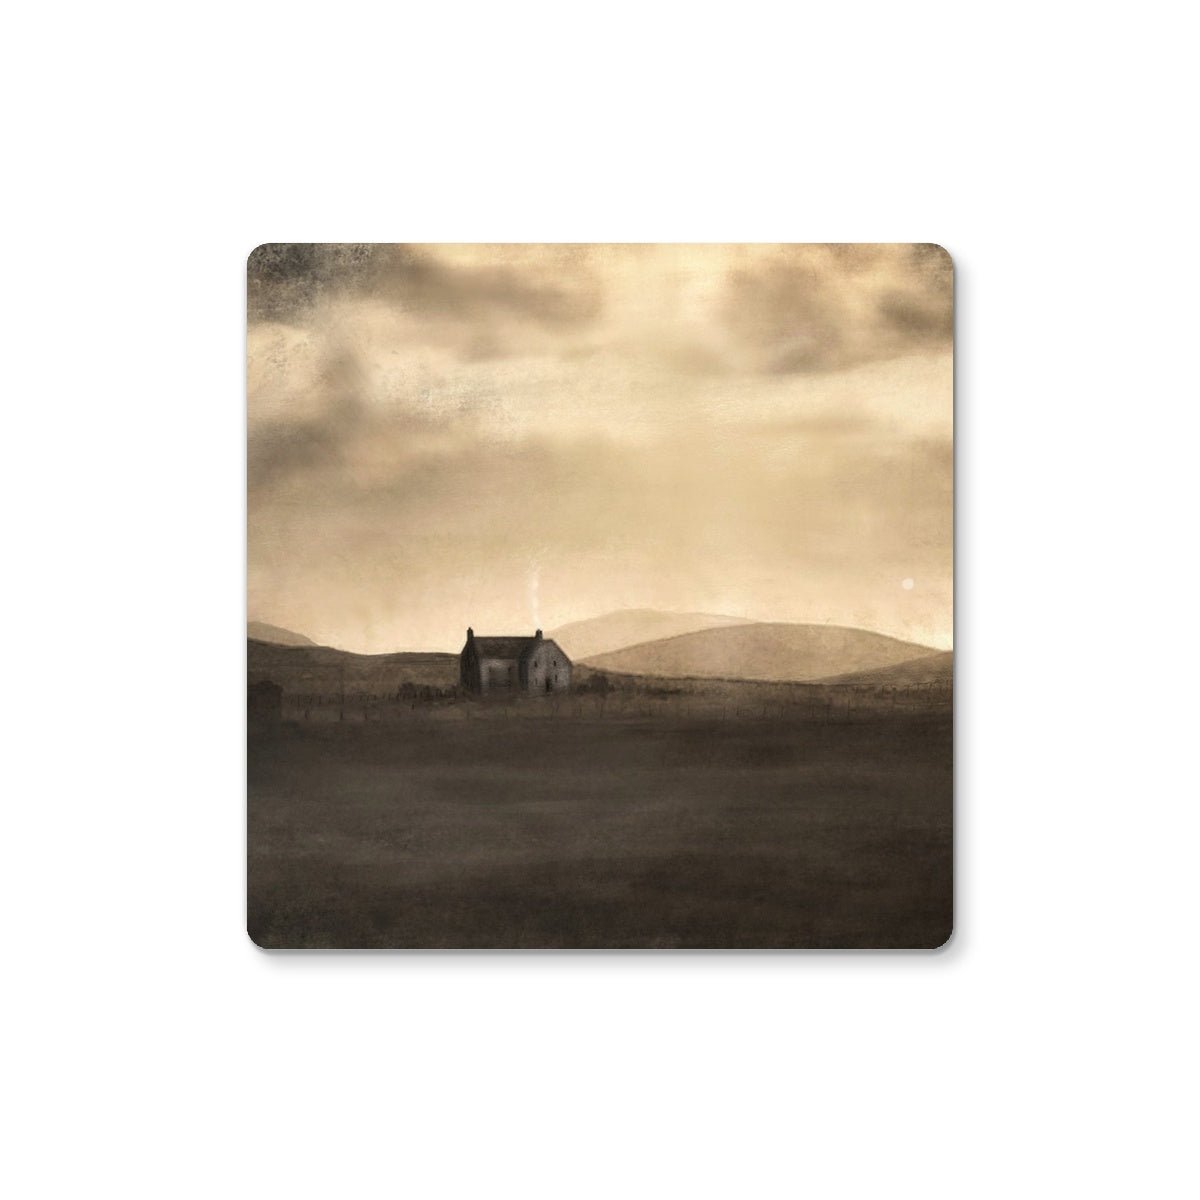 A Moonlit Croft Art Gifts Coaster-Coasters-Hebridean Islands Art Gallery-4 Coasters-Paintings, Prints, Homeware, Art Gifts From Scotland By Scottish Artist Kevin Hunter